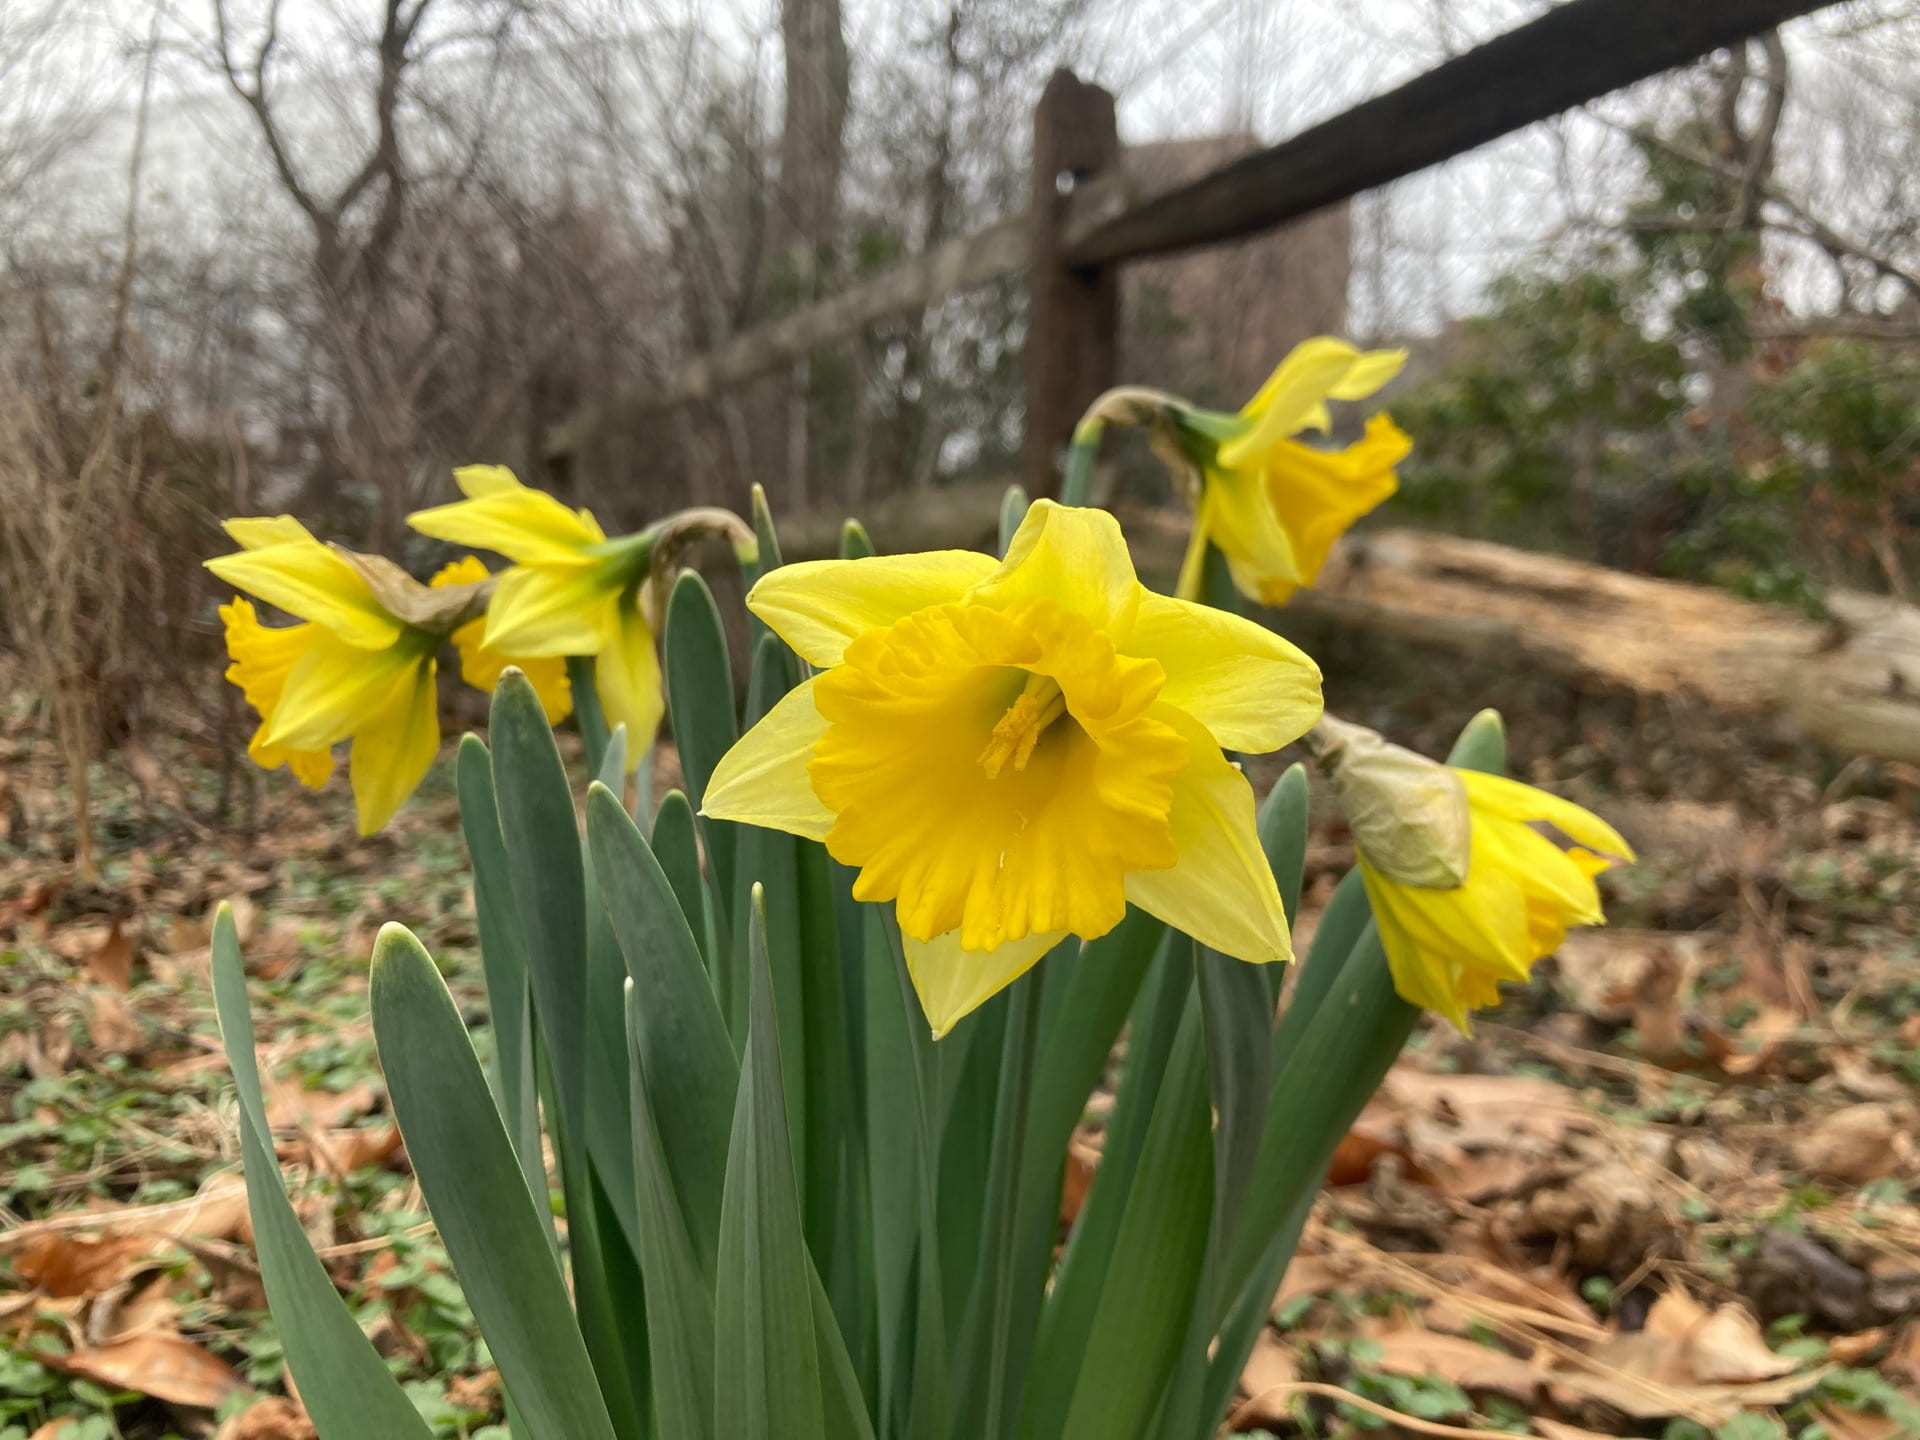 The first daffodil, Narcissus cv., begins blooming in late January.